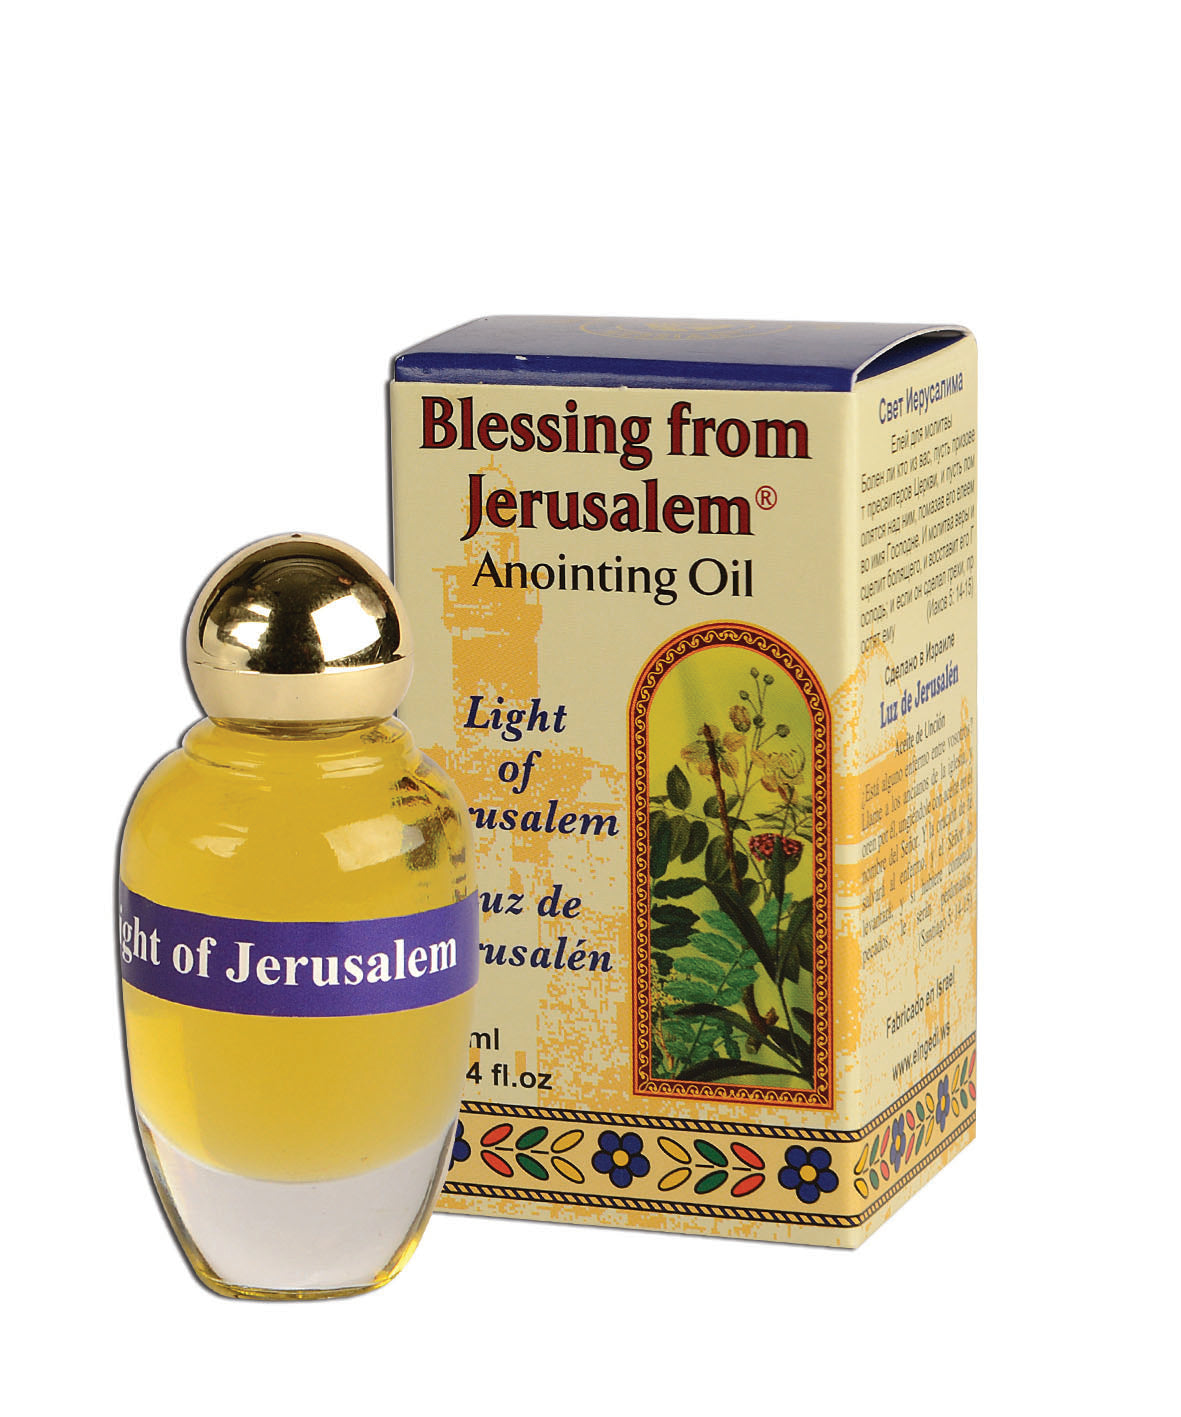  Holy Oil - Elijah - Anointing Oil for Prayer with Biblical  Spices, 0.34 fl oz